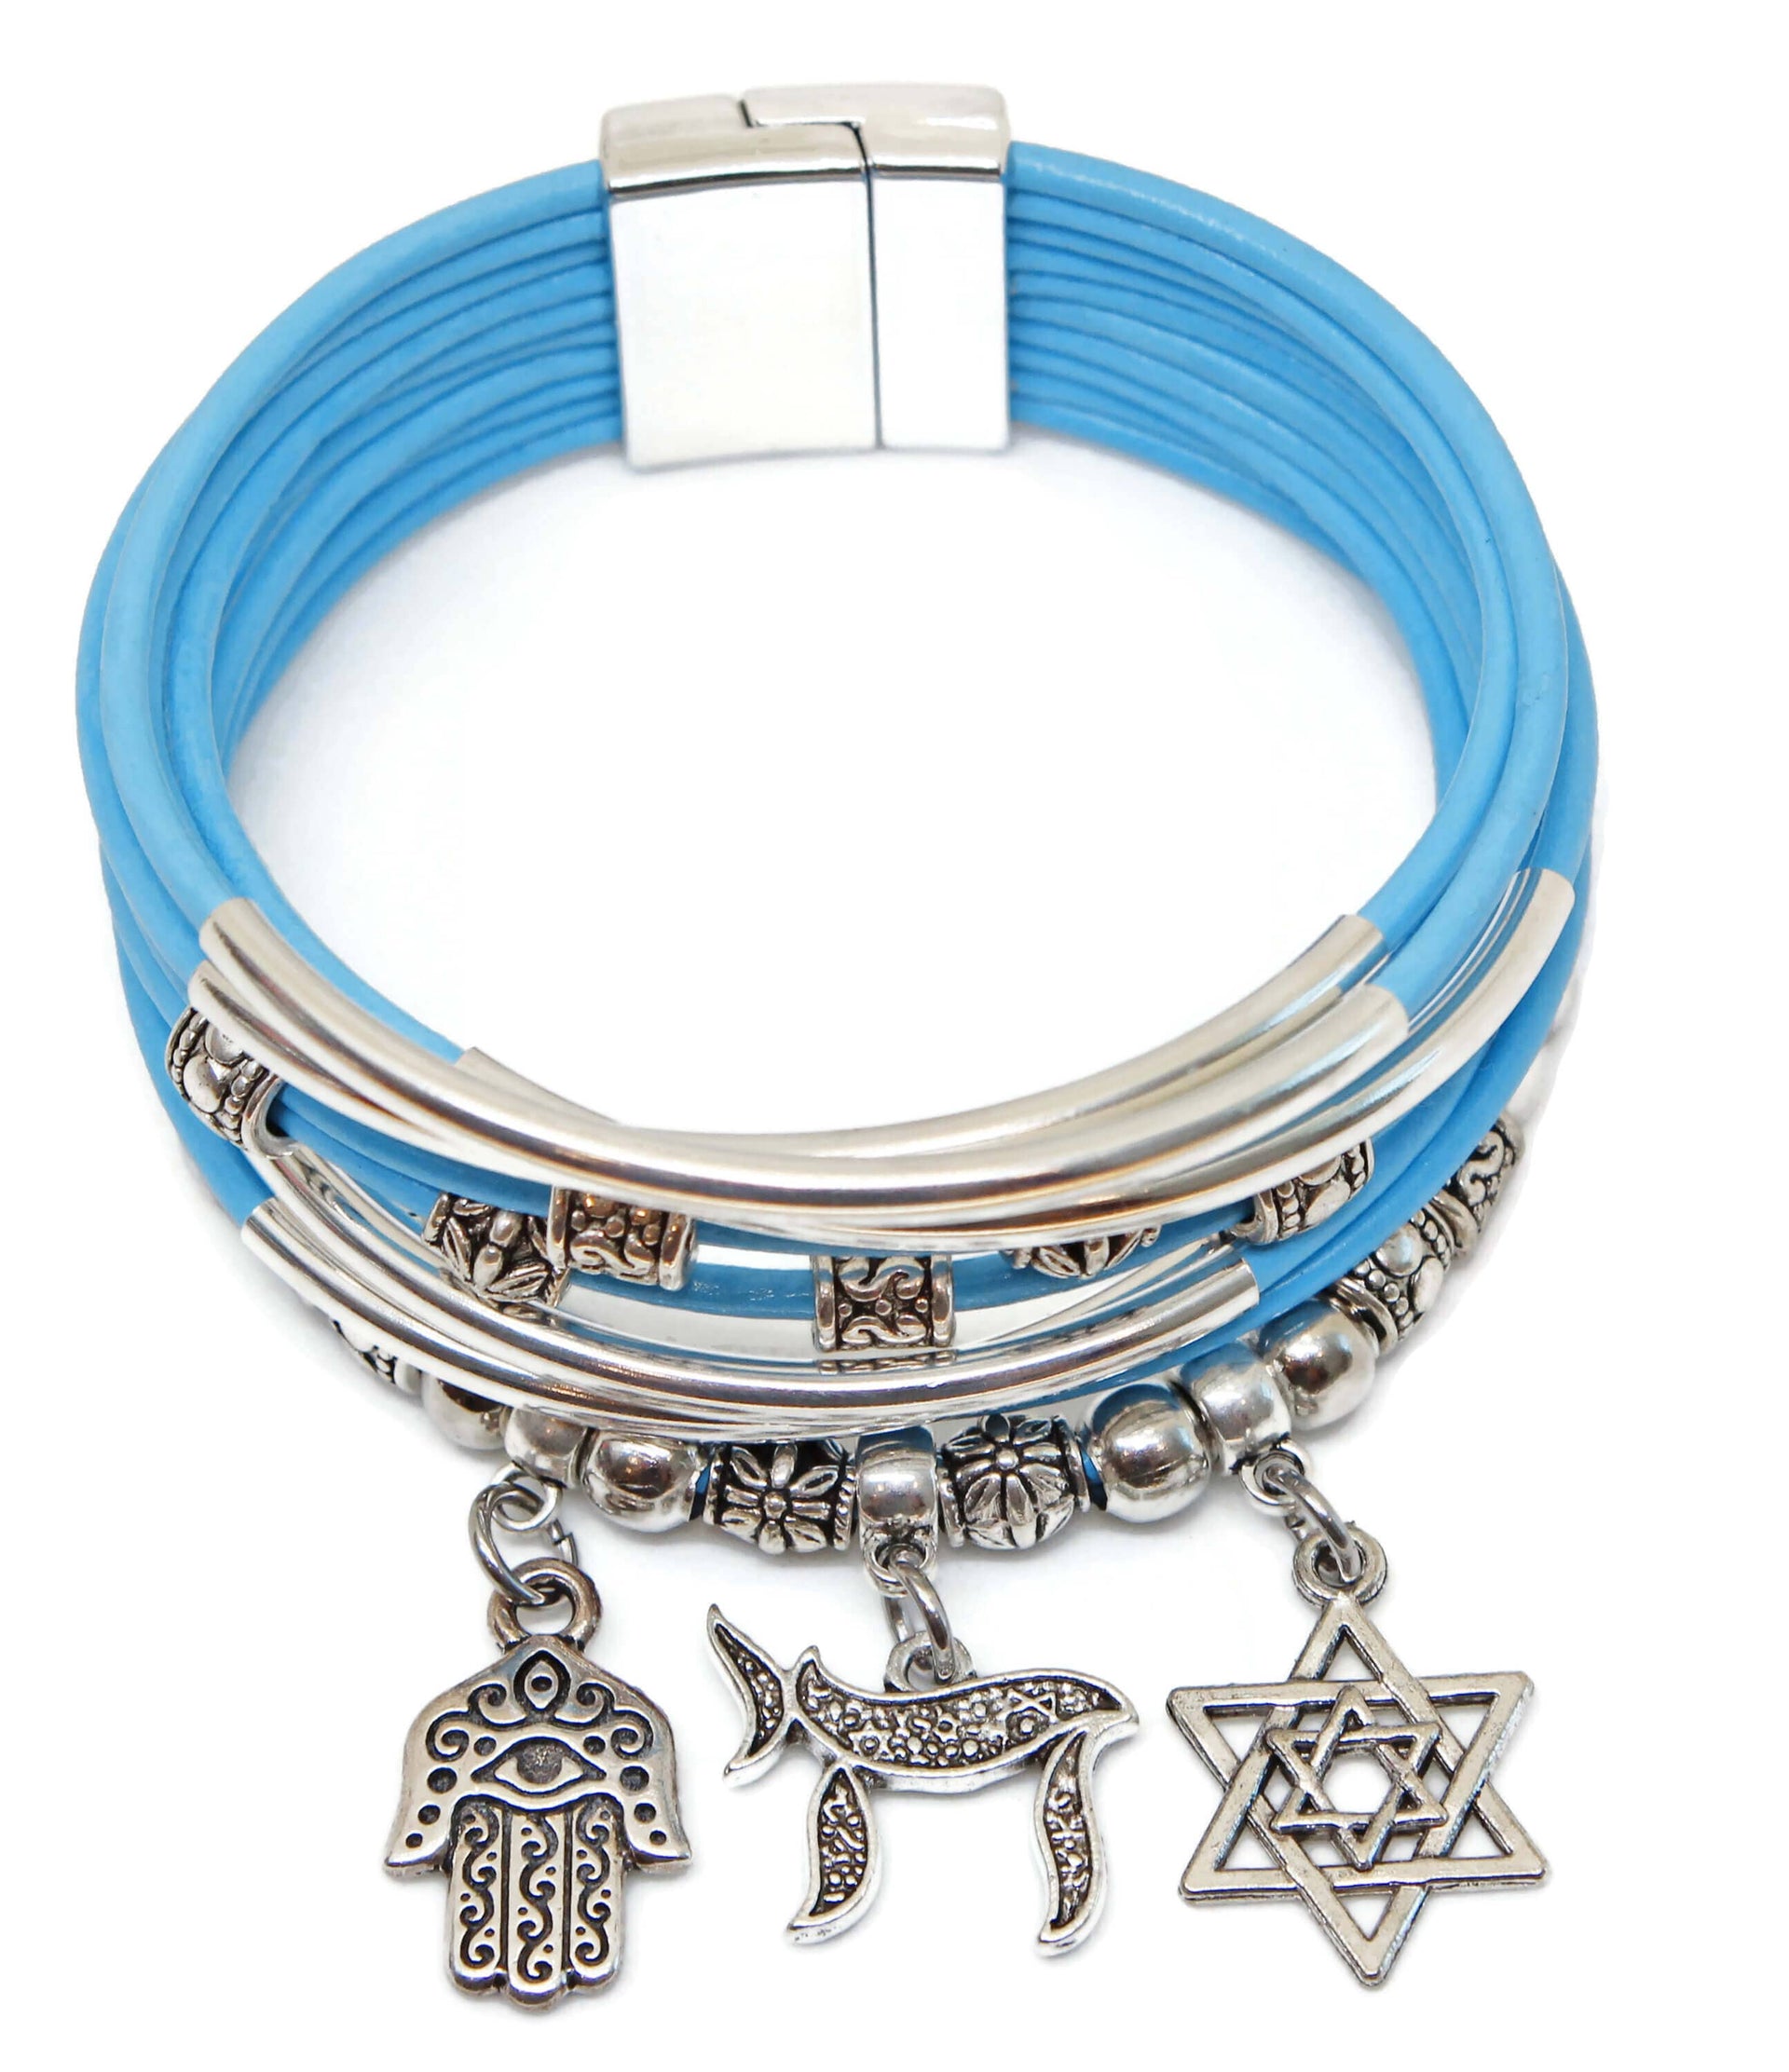 Sachi Ocean Sky Collection Bracelet - Beads and Charms